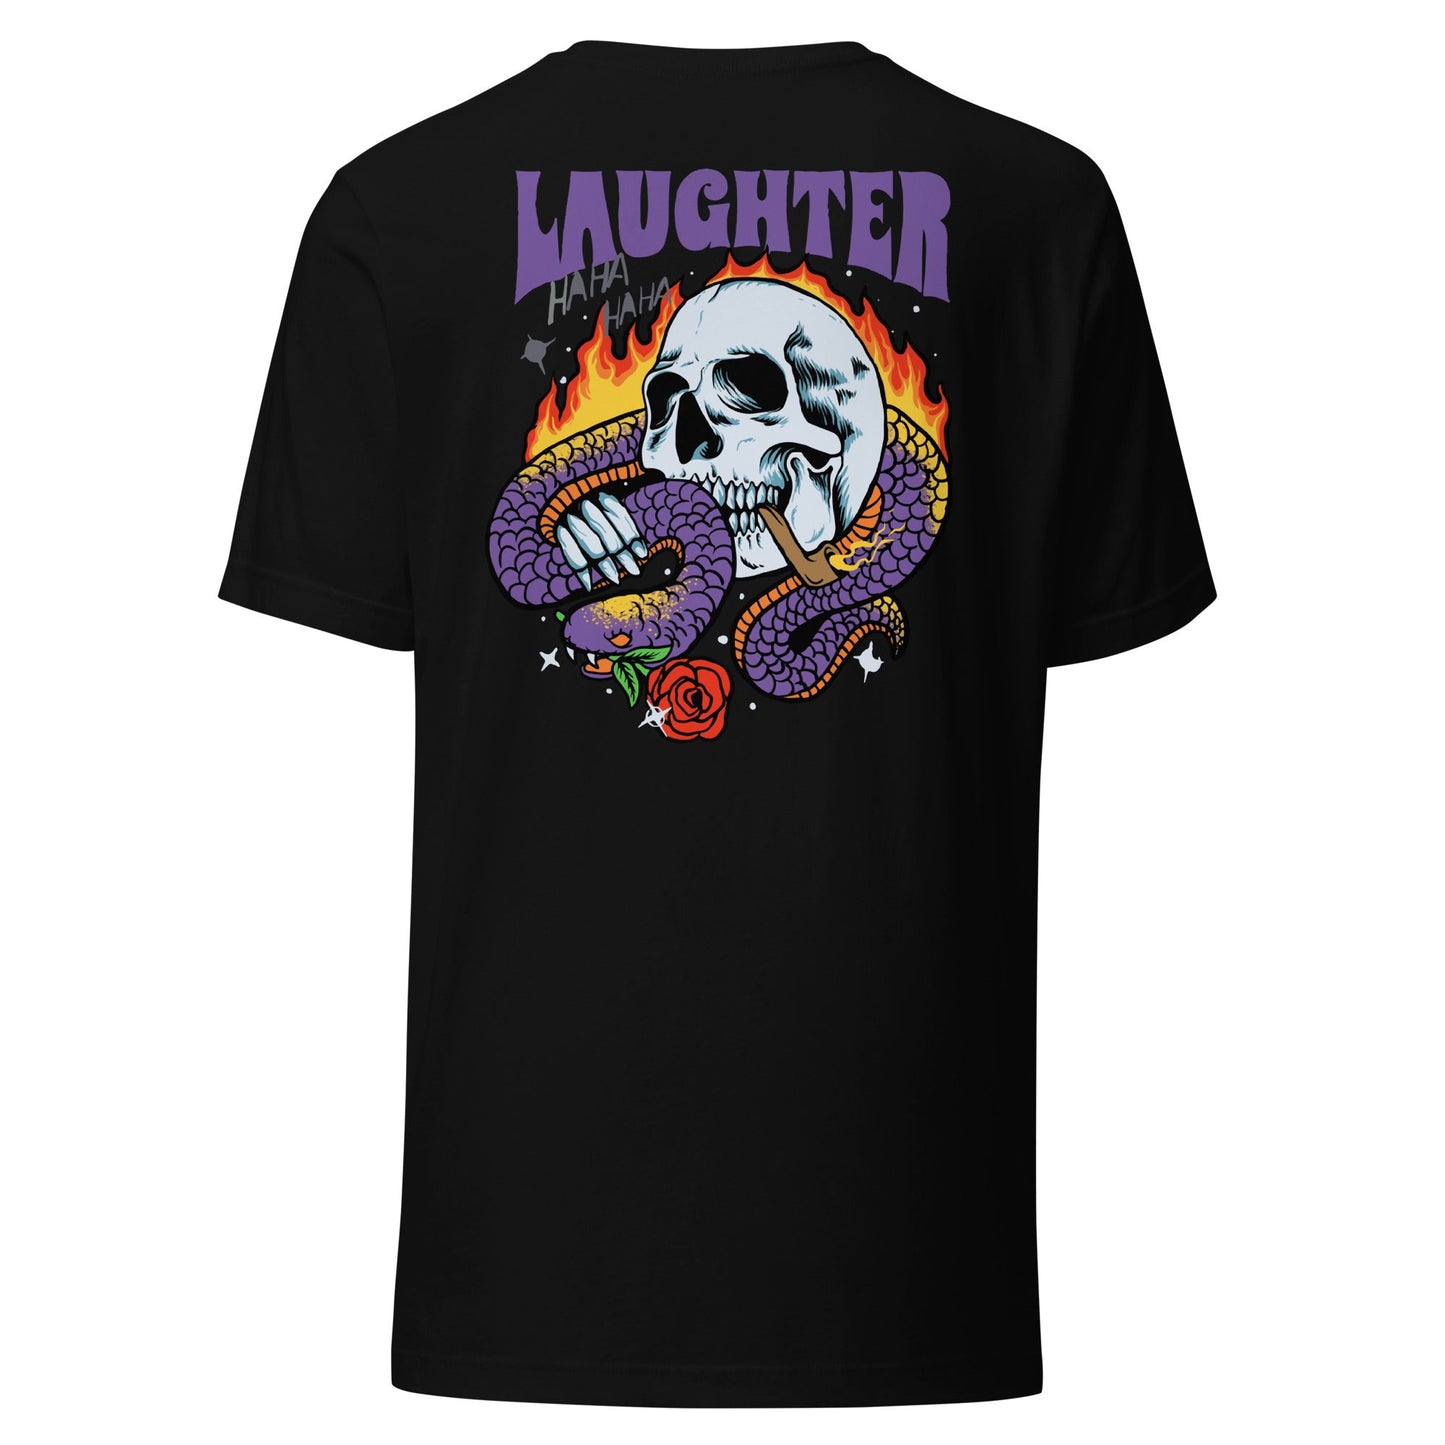 Cool Laughter Skull Unisex T-Shirt - Trendy, Comfortable, and Unique